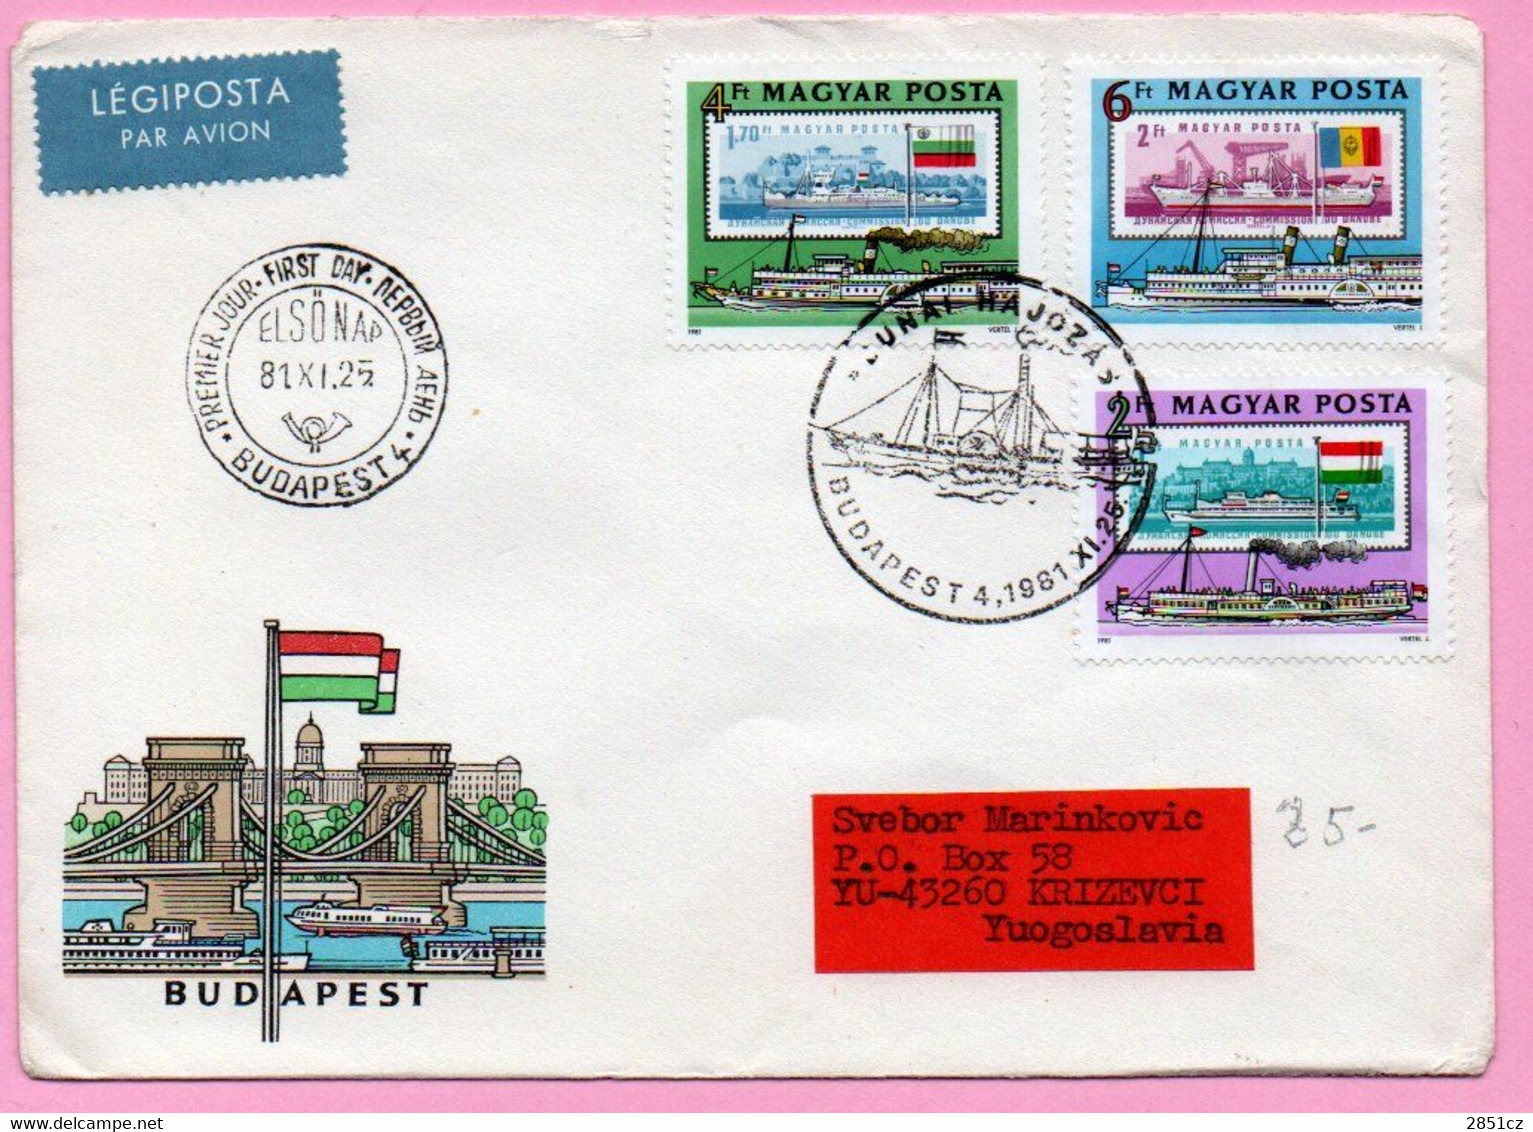 Letter - Stamp Ships / Postmark Premier Jour/First Day/Dunai Hajozas, Budapest, 1981., Hungary, Air Mail - Covers & Documents